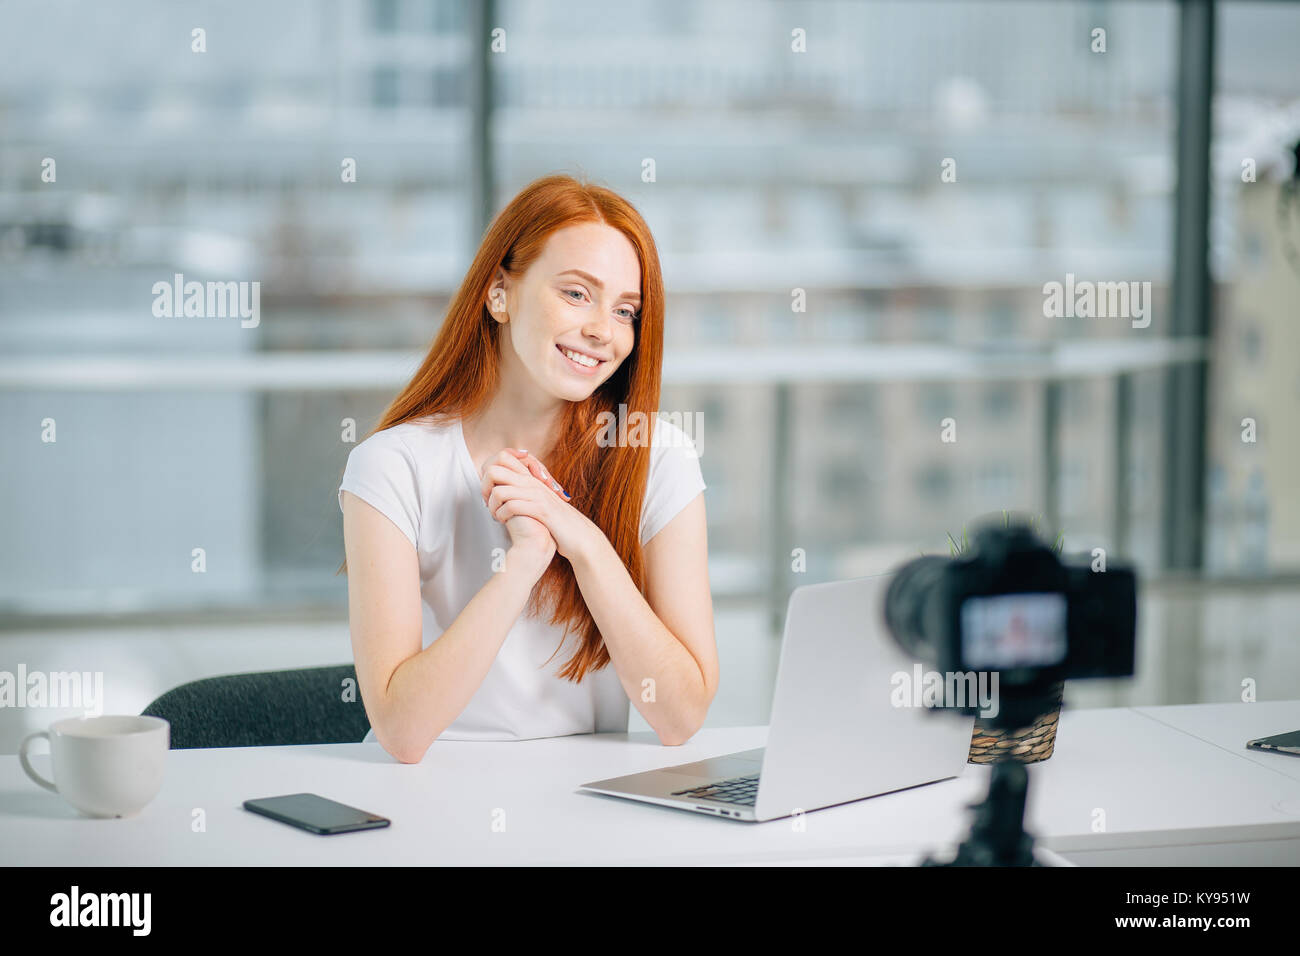 Young woman recording video on camera mounted on tripod for her vlog Stock Photo